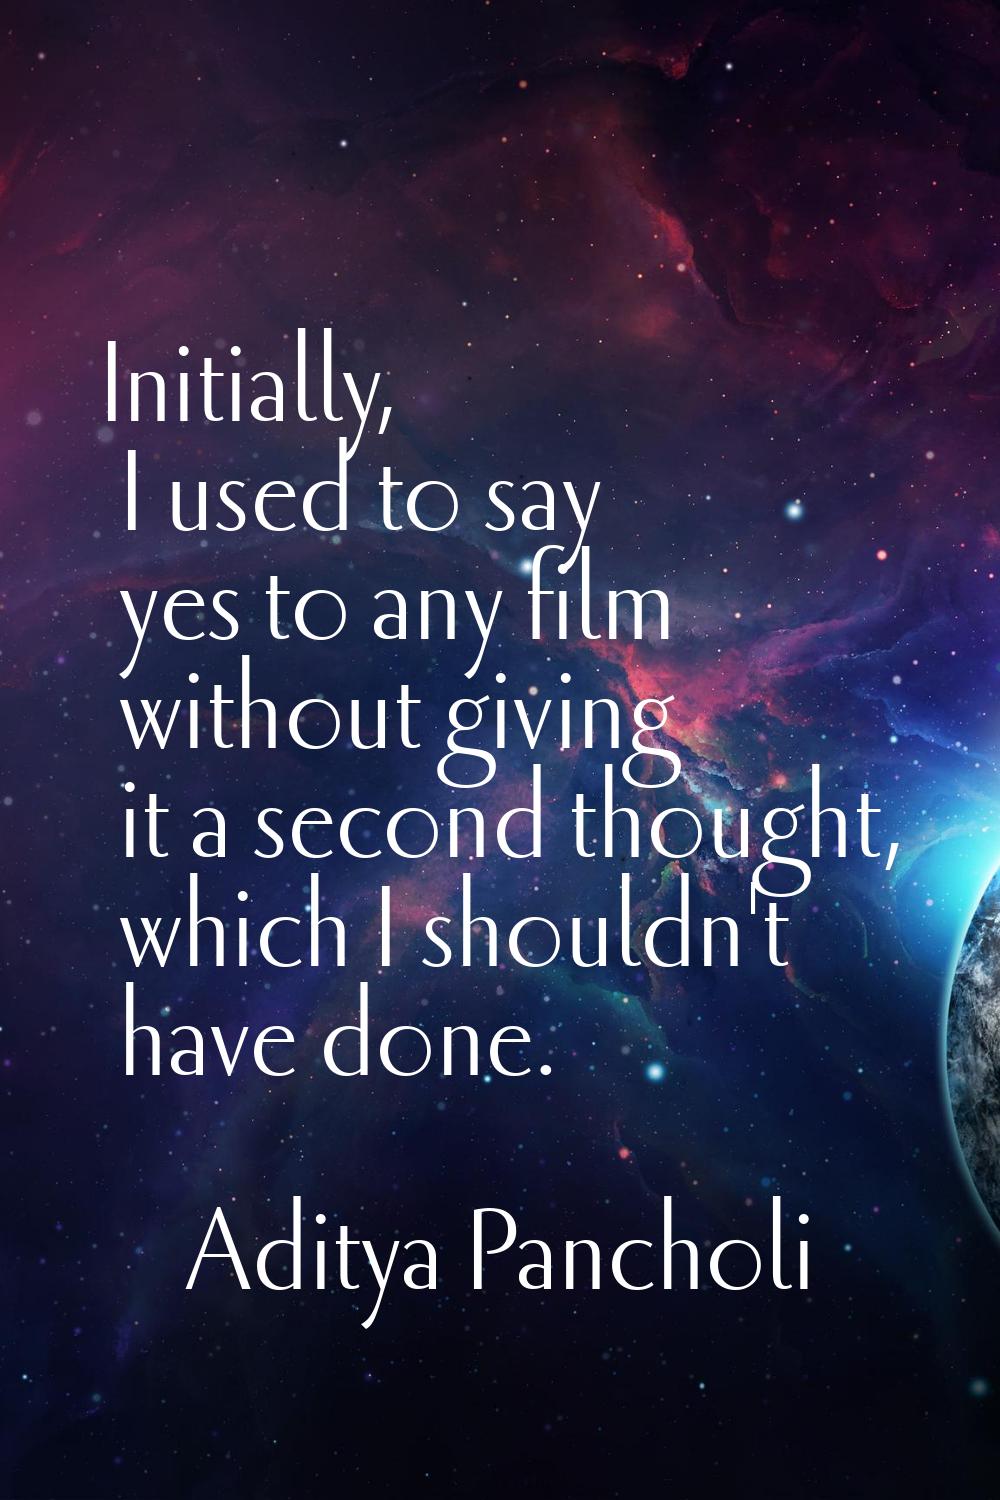 Initially, I used to say yes to any film without giving it a second thought, which I shouldn't have